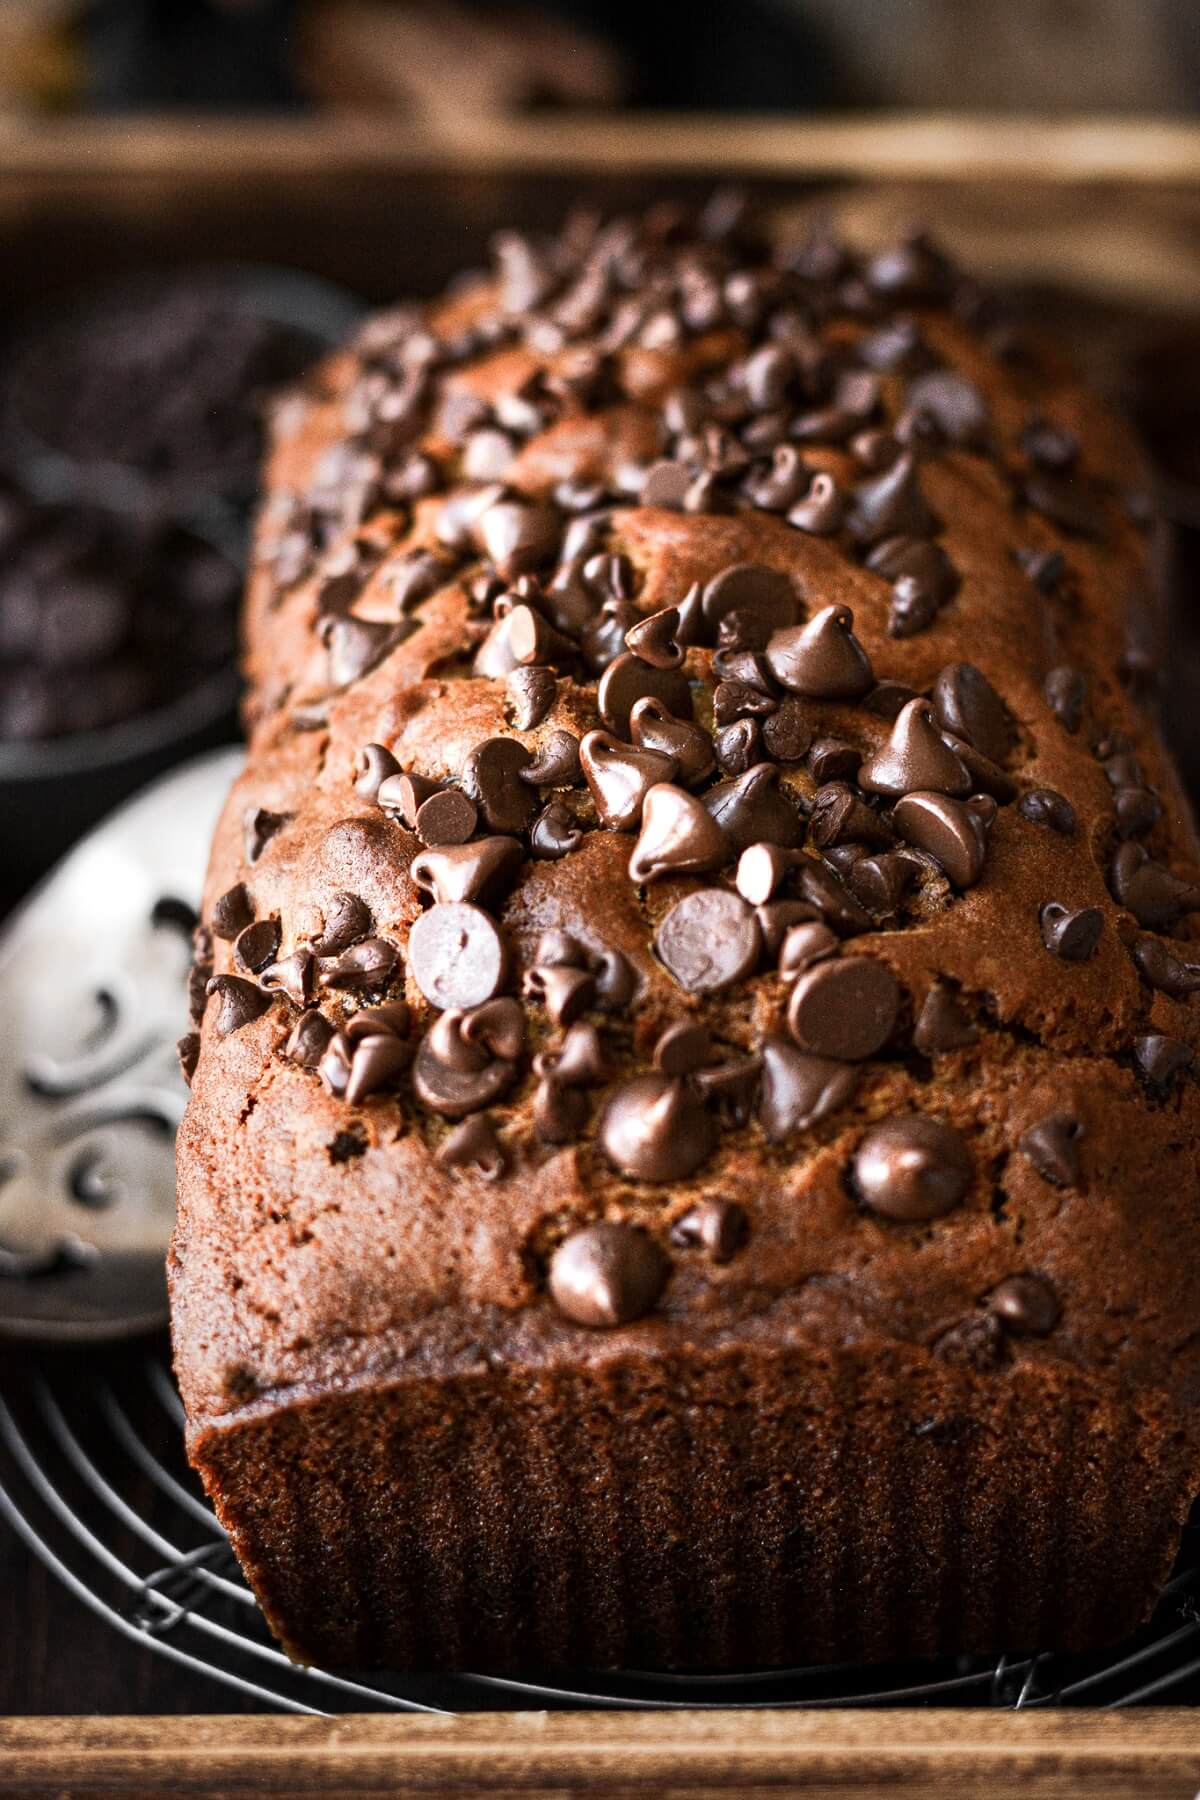 Loaf of pumpkin bread with chocolate chips sprinkled on top.